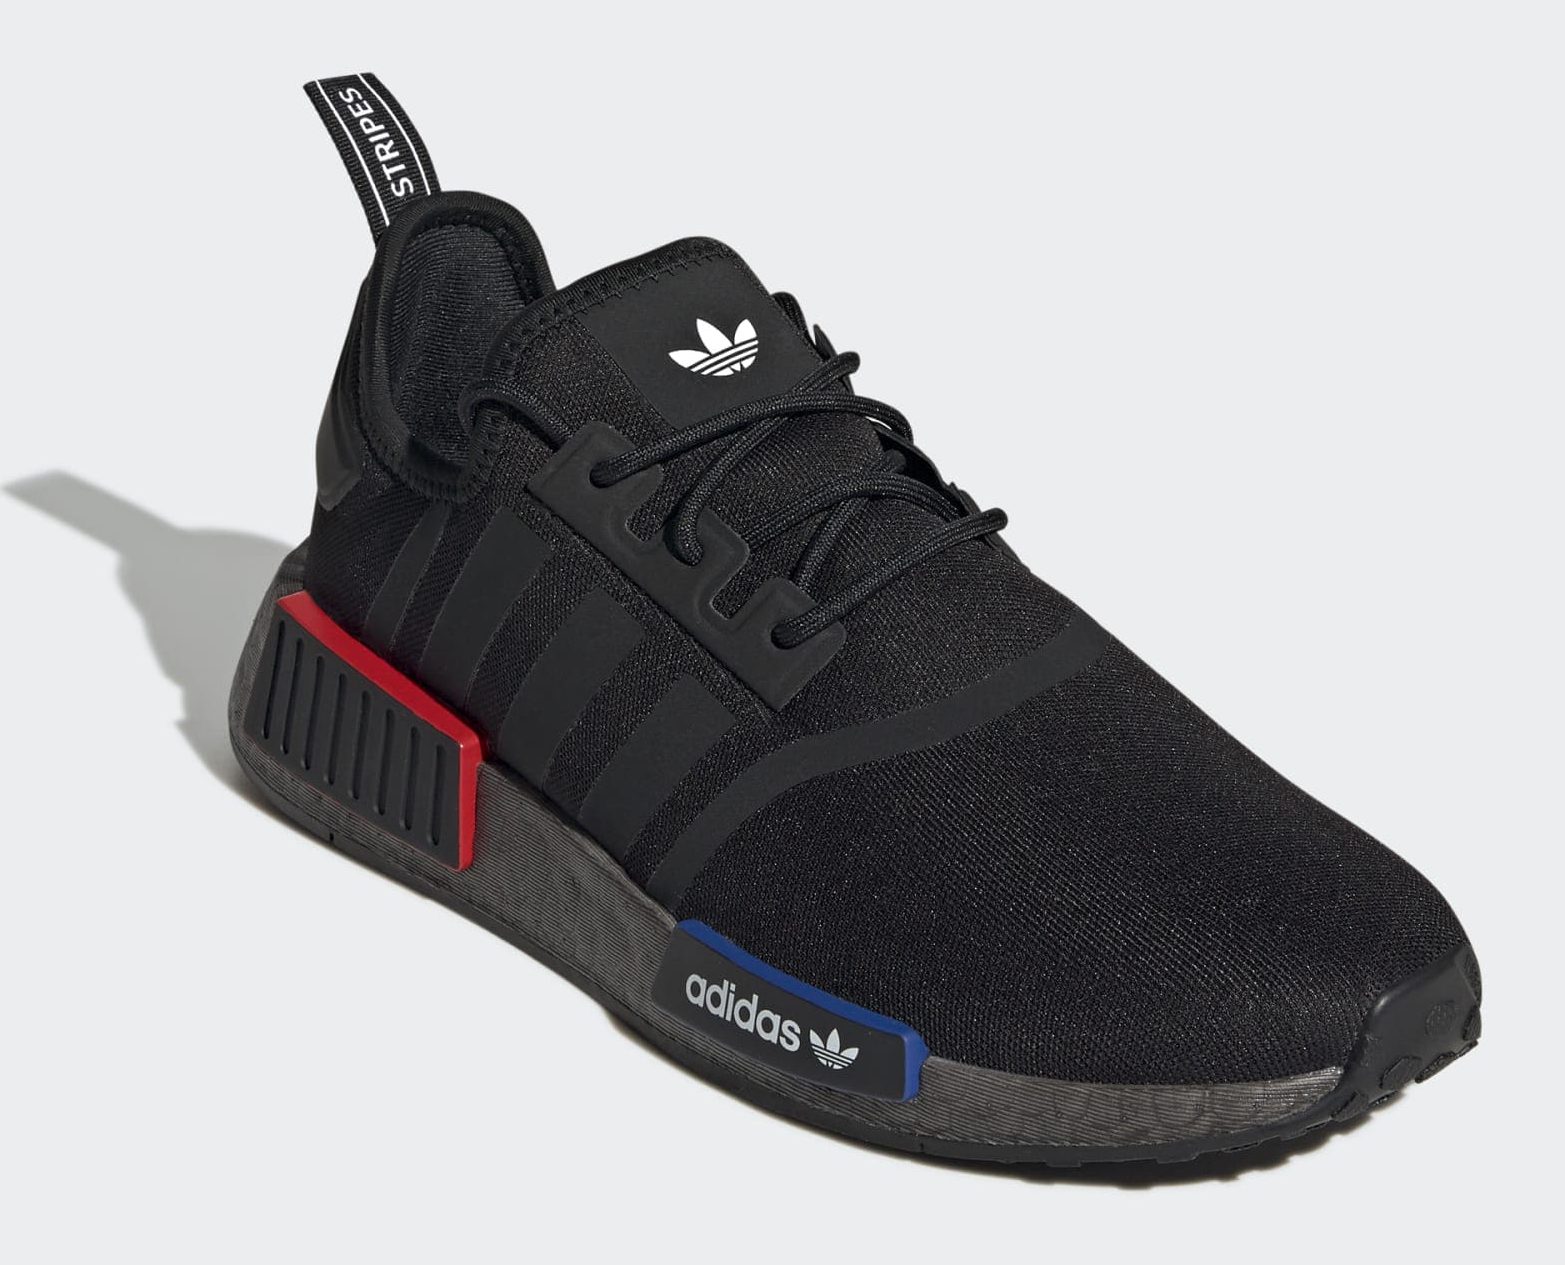 NMD_R1 shoes for men